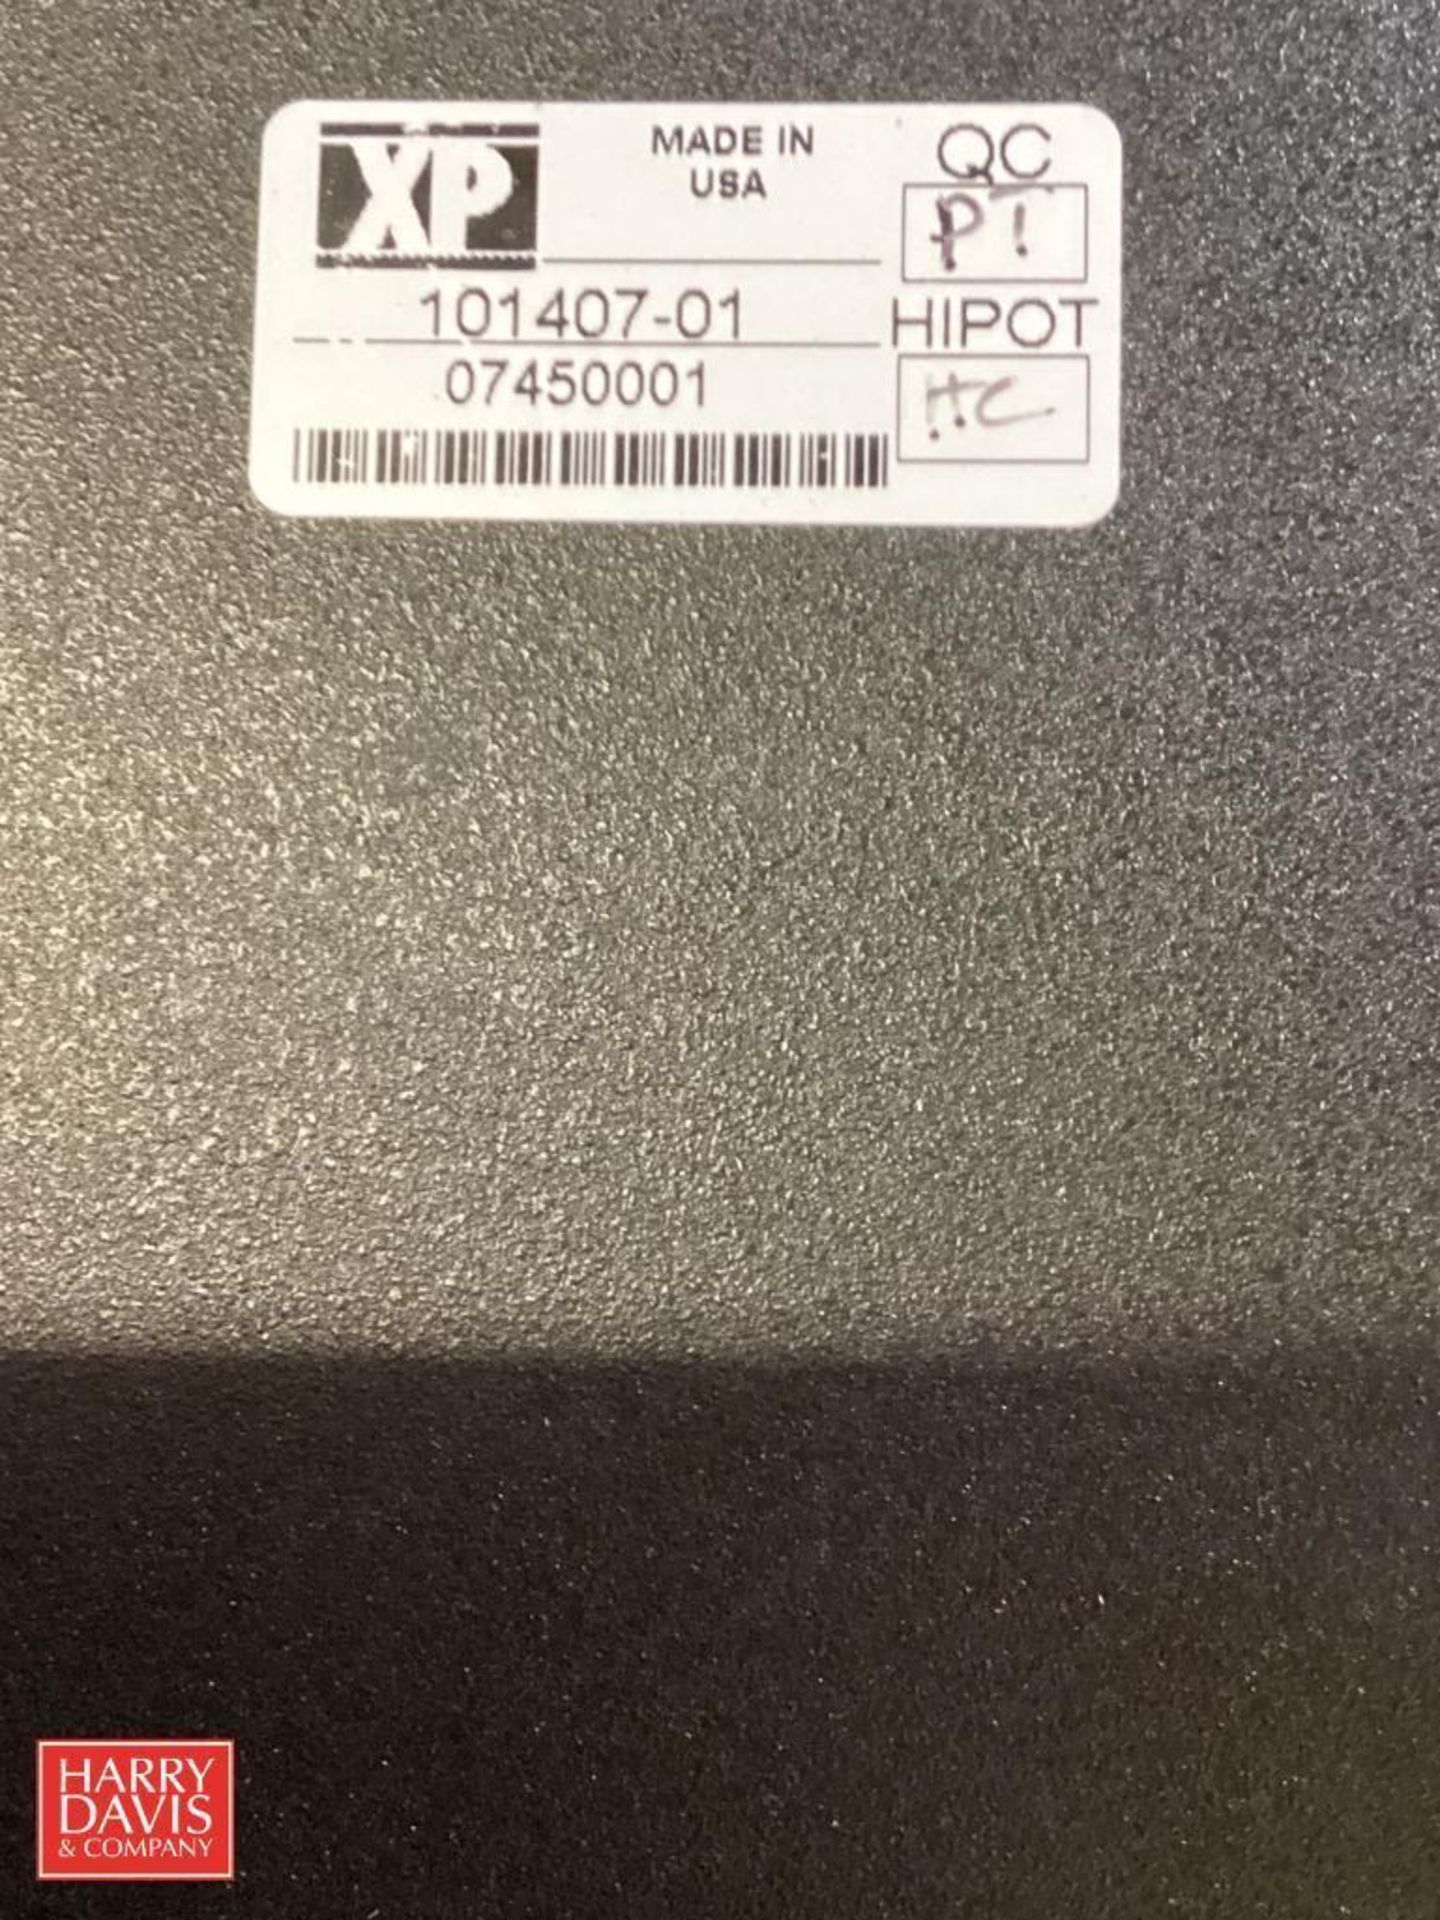 XP 101407-01 Power Supply - Image 3 of 3